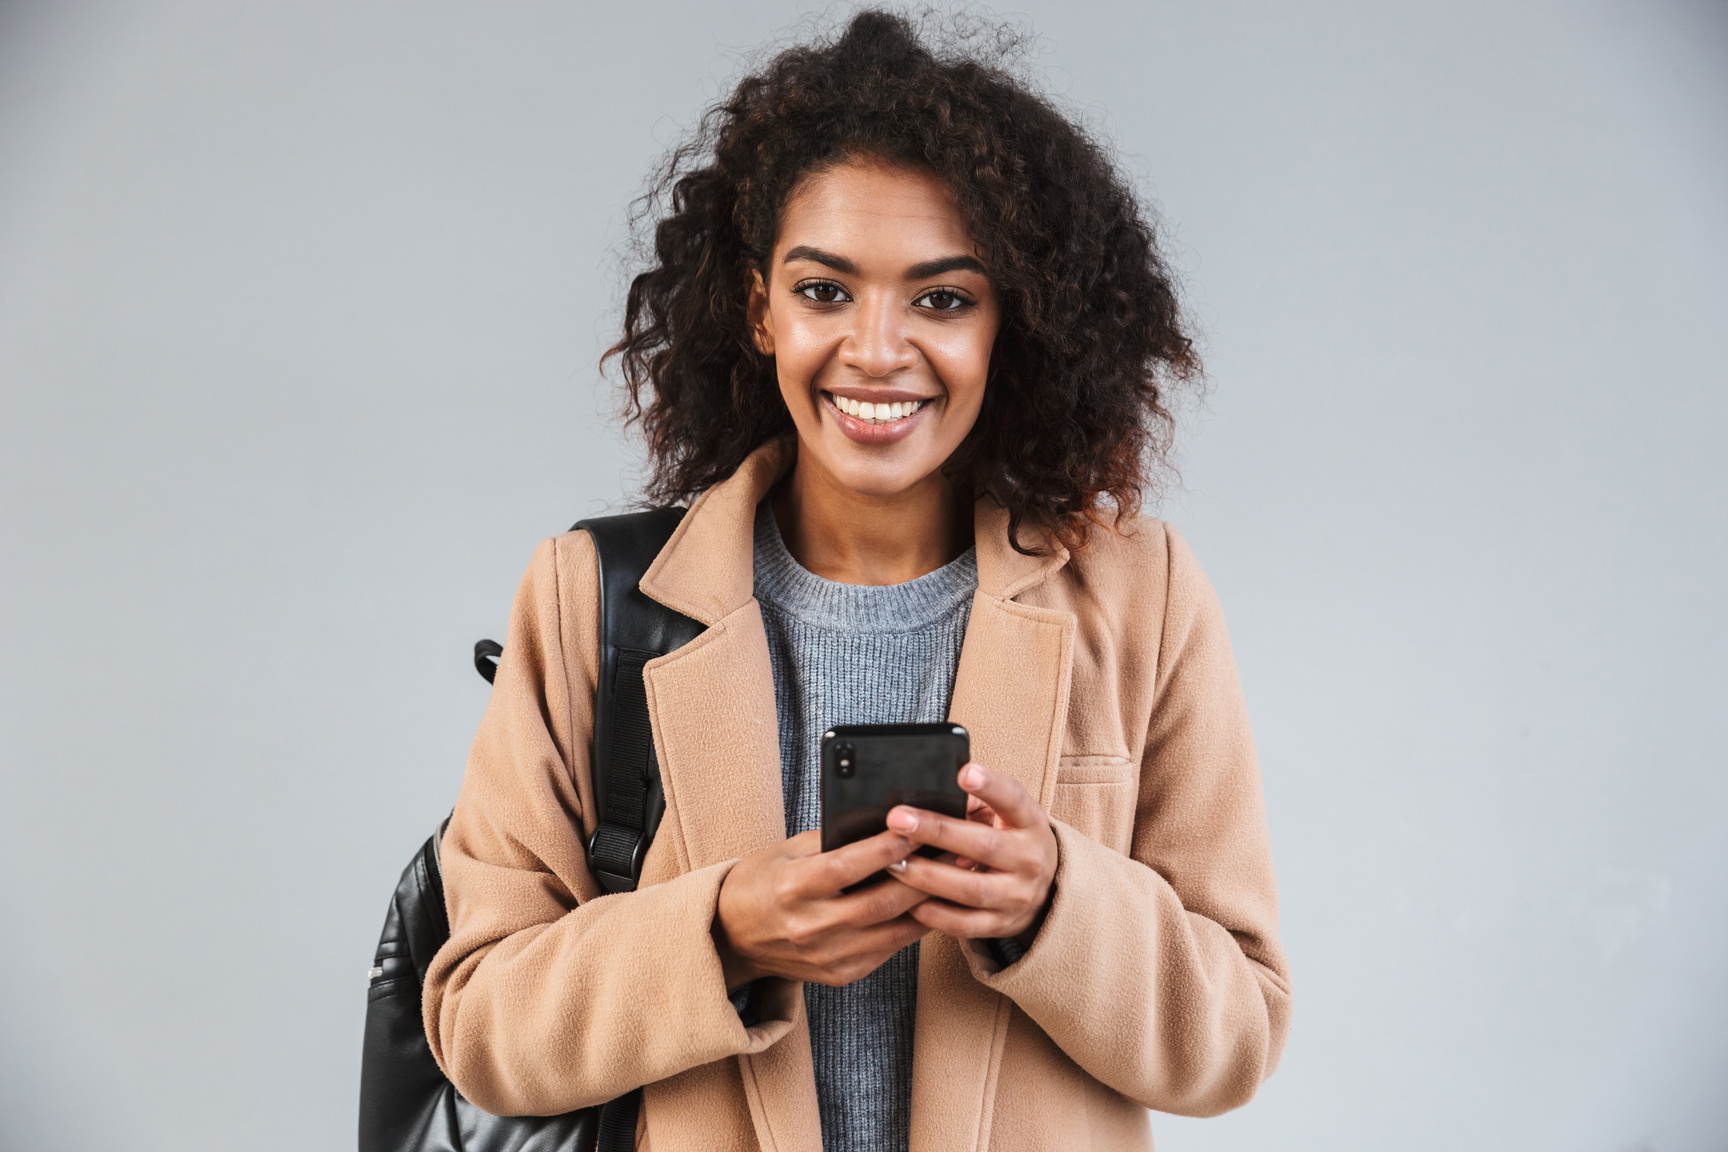 Smiling Woman Holding a Smartphone